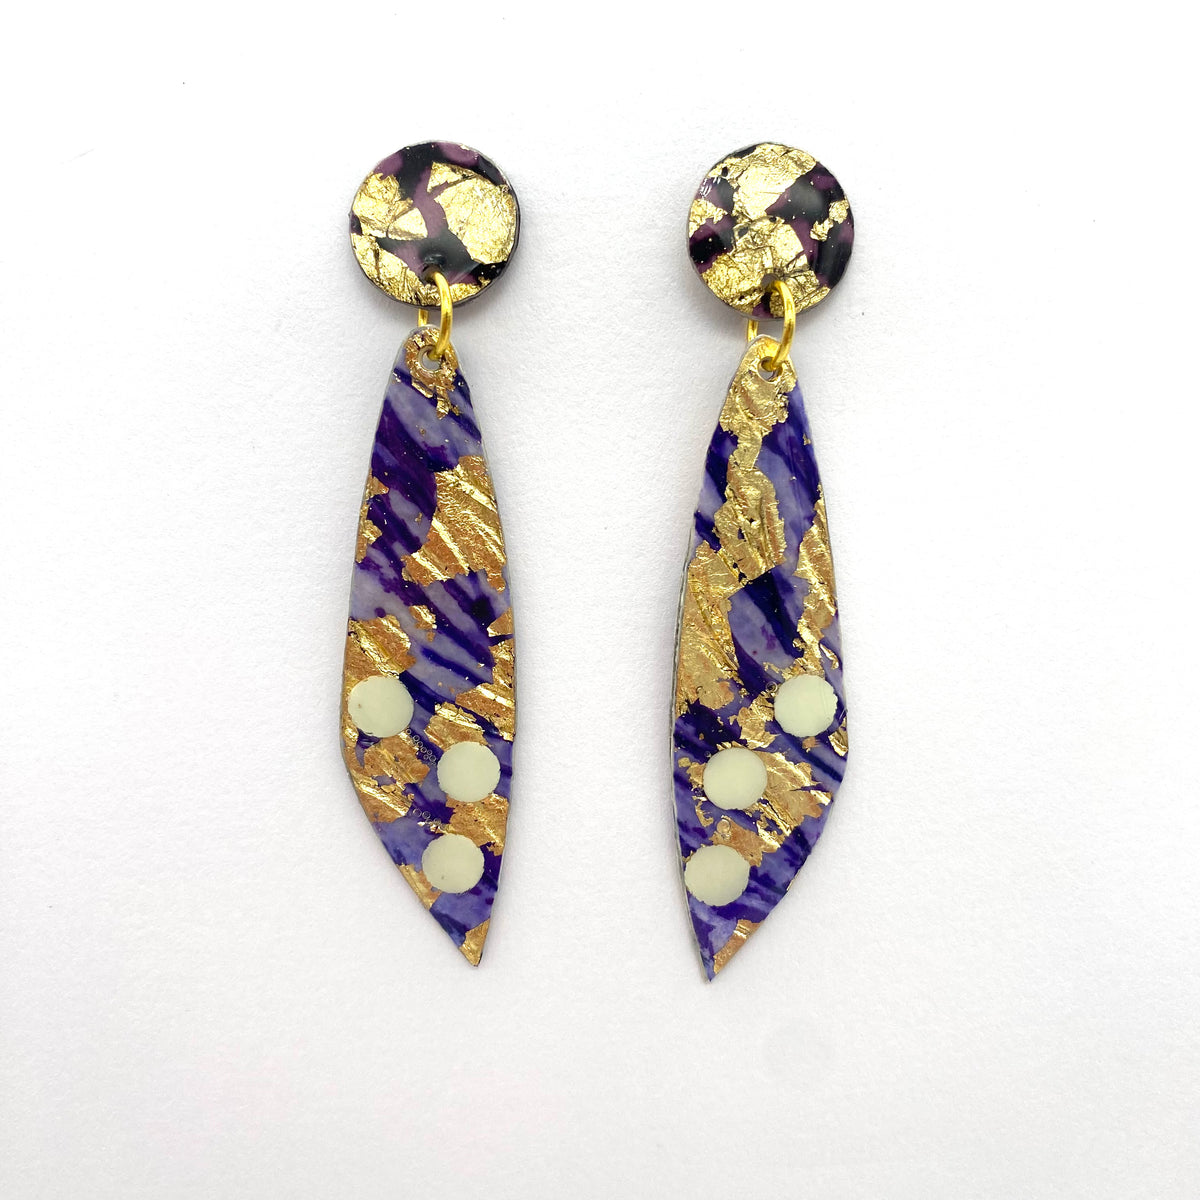 Moondrifter sgraffito textile earrings in gold/lilac/aubergine